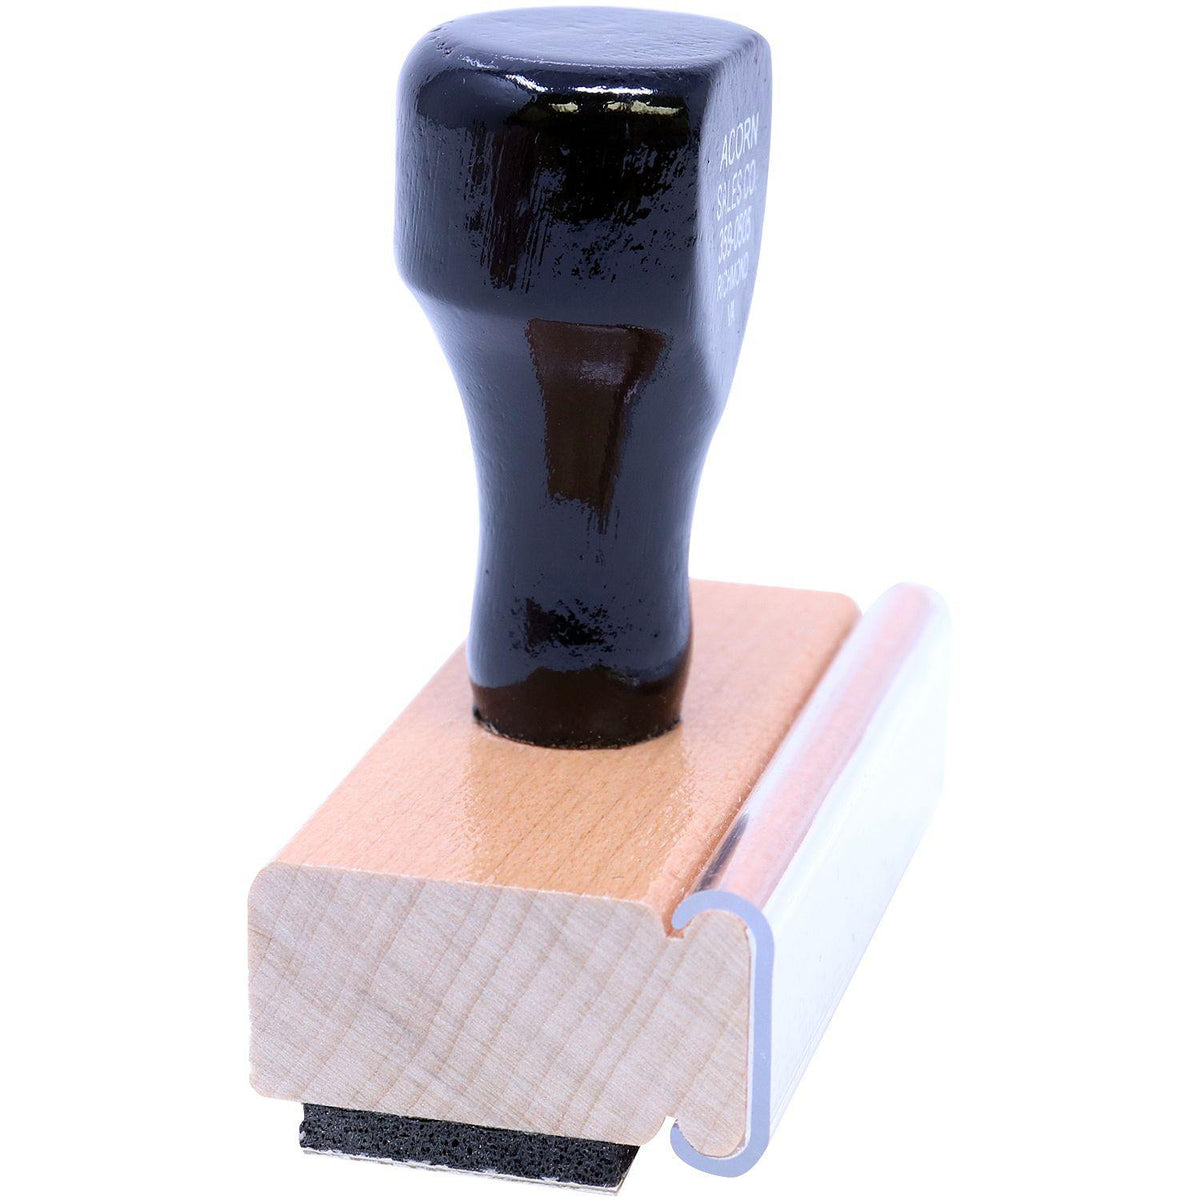 Narrow Font Duplicate Rubber Stamp - Engineer Seal Stamps - Brand_Acorn, Impression Size_Small, Stamp Type_Regular Stamp, Type of Use_Office